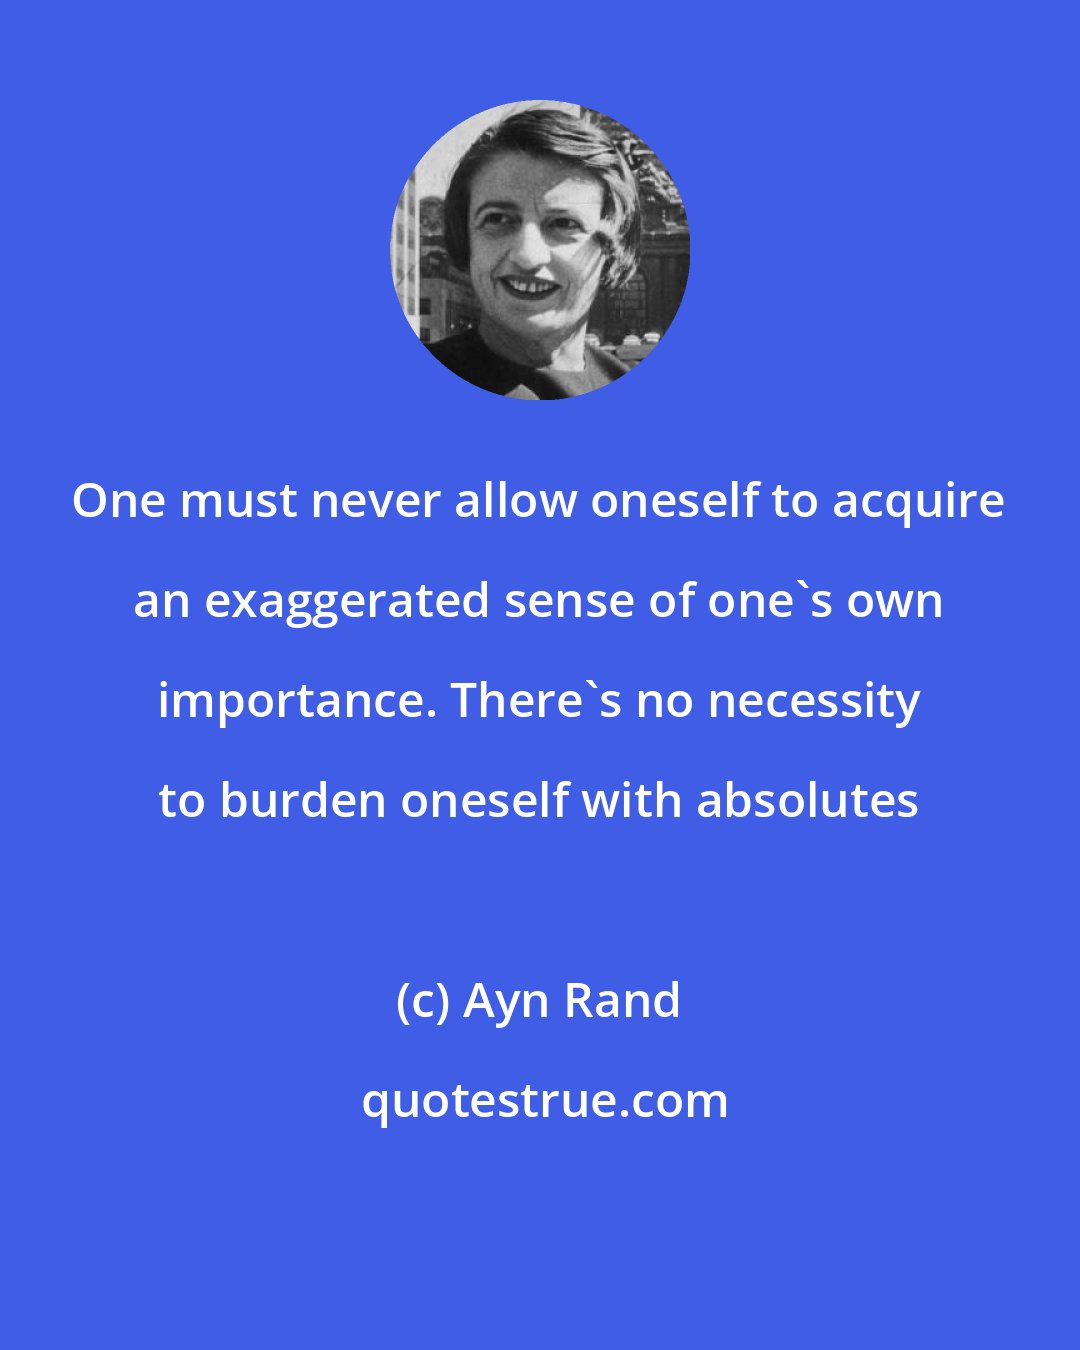 Ayn Rand: One must never allow oneself to acquire an exaggerated sense of one's own importance. There's no necessity to burden oneself with absolutes